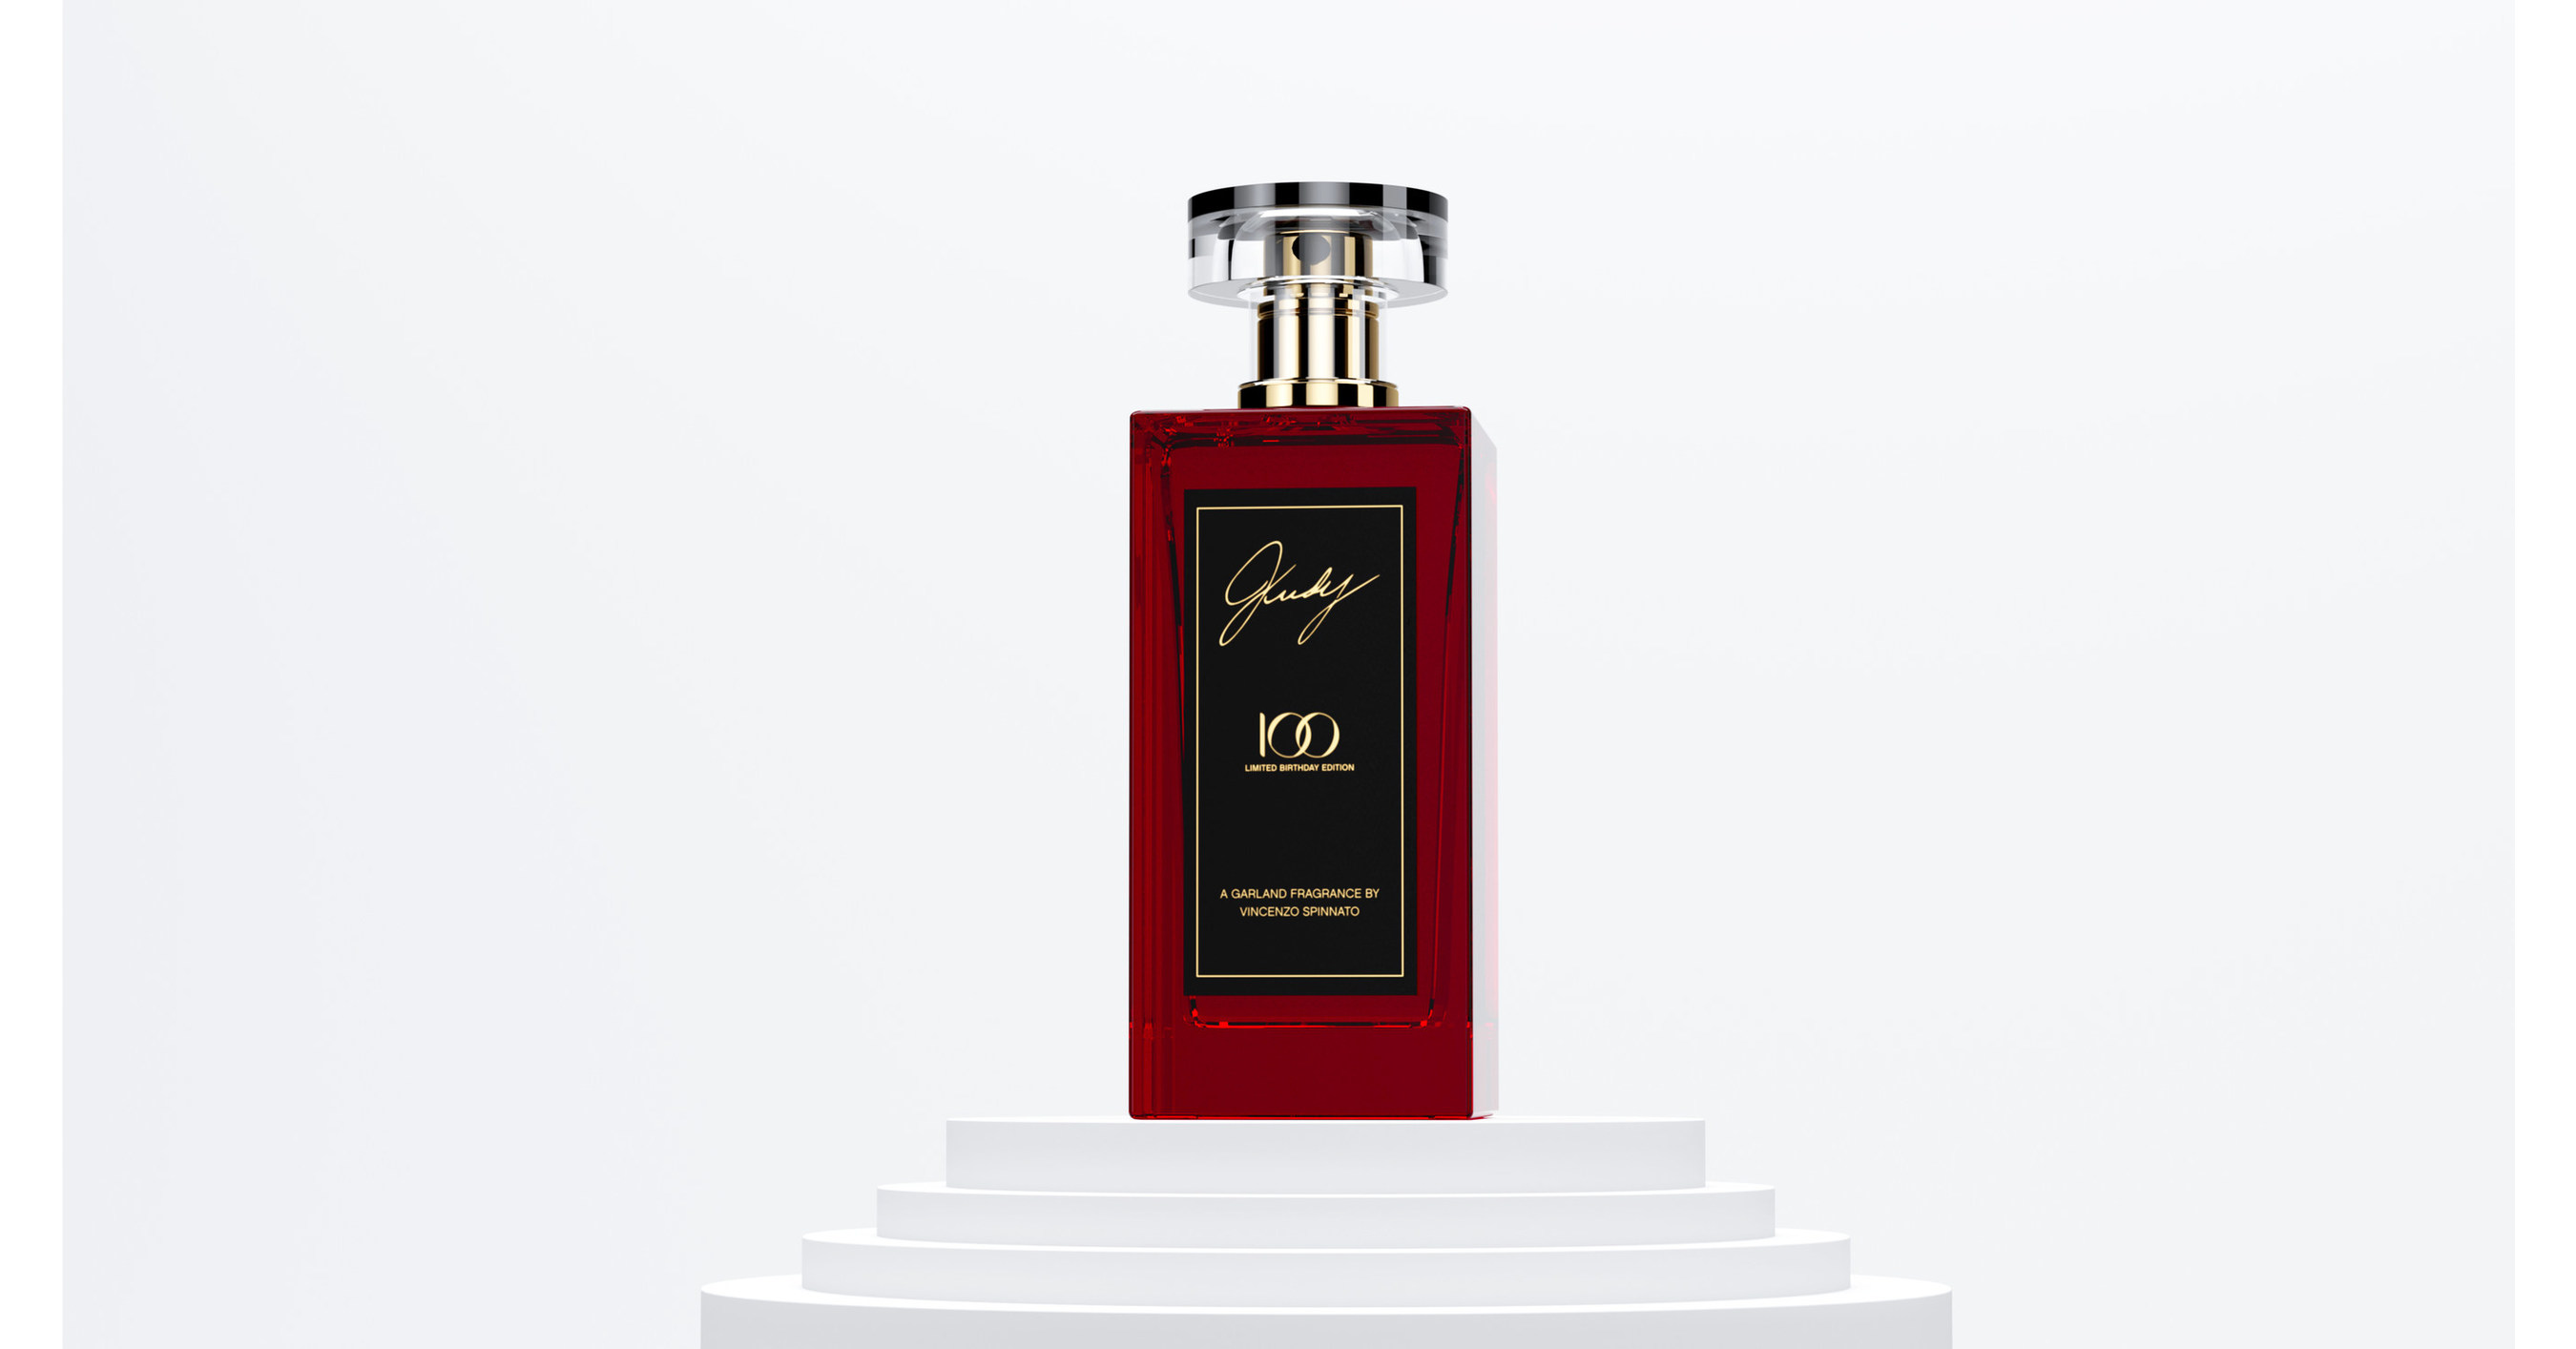 THE GLOBAL PREMIERE OF JUDY GARLAND'S UNISEX FINE FRAGRANCE IS ON TRACK TO  BE A SHOWSTOPPER AT THE ICON'S 100TH BIRTHDAY GALA IN HOLLYWOOD JUNE 10,  2022